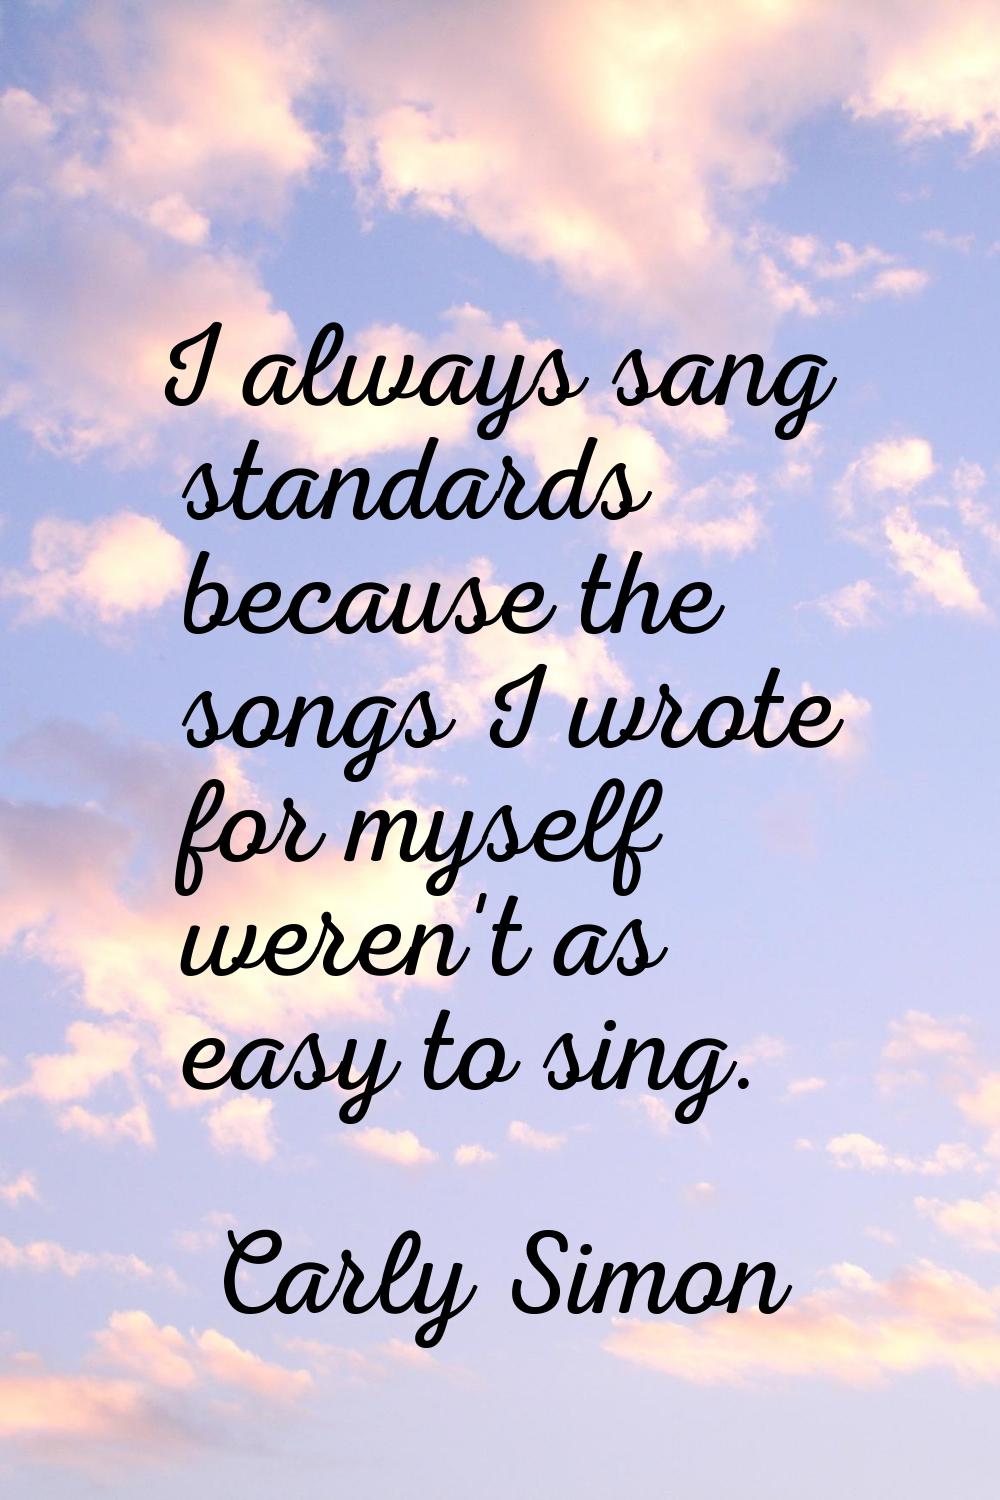 I always sang standards because the songs I wrote for myself weren't as easy to sing.